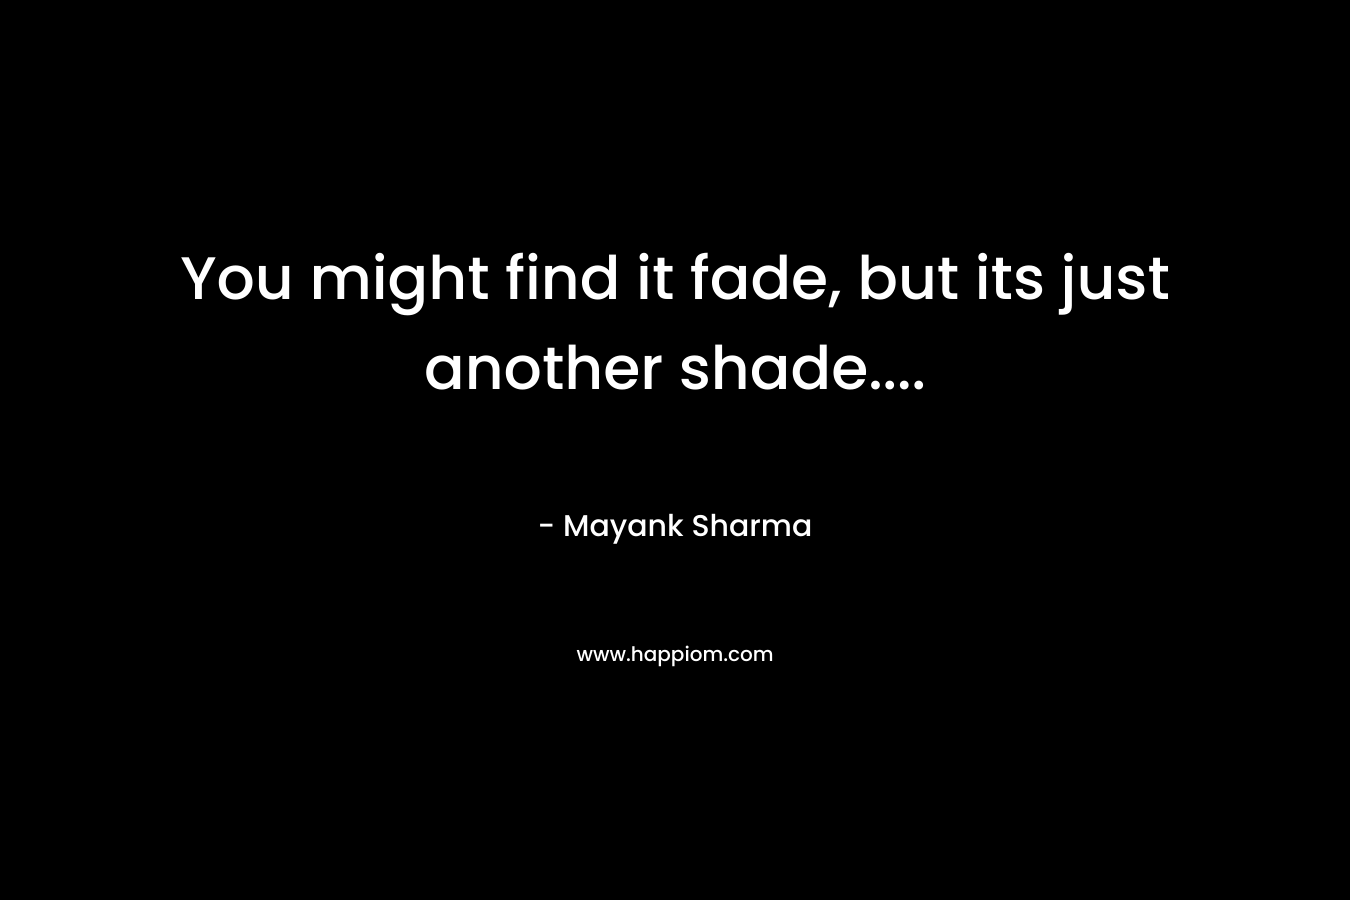 You might find it fade, but its just another shade....